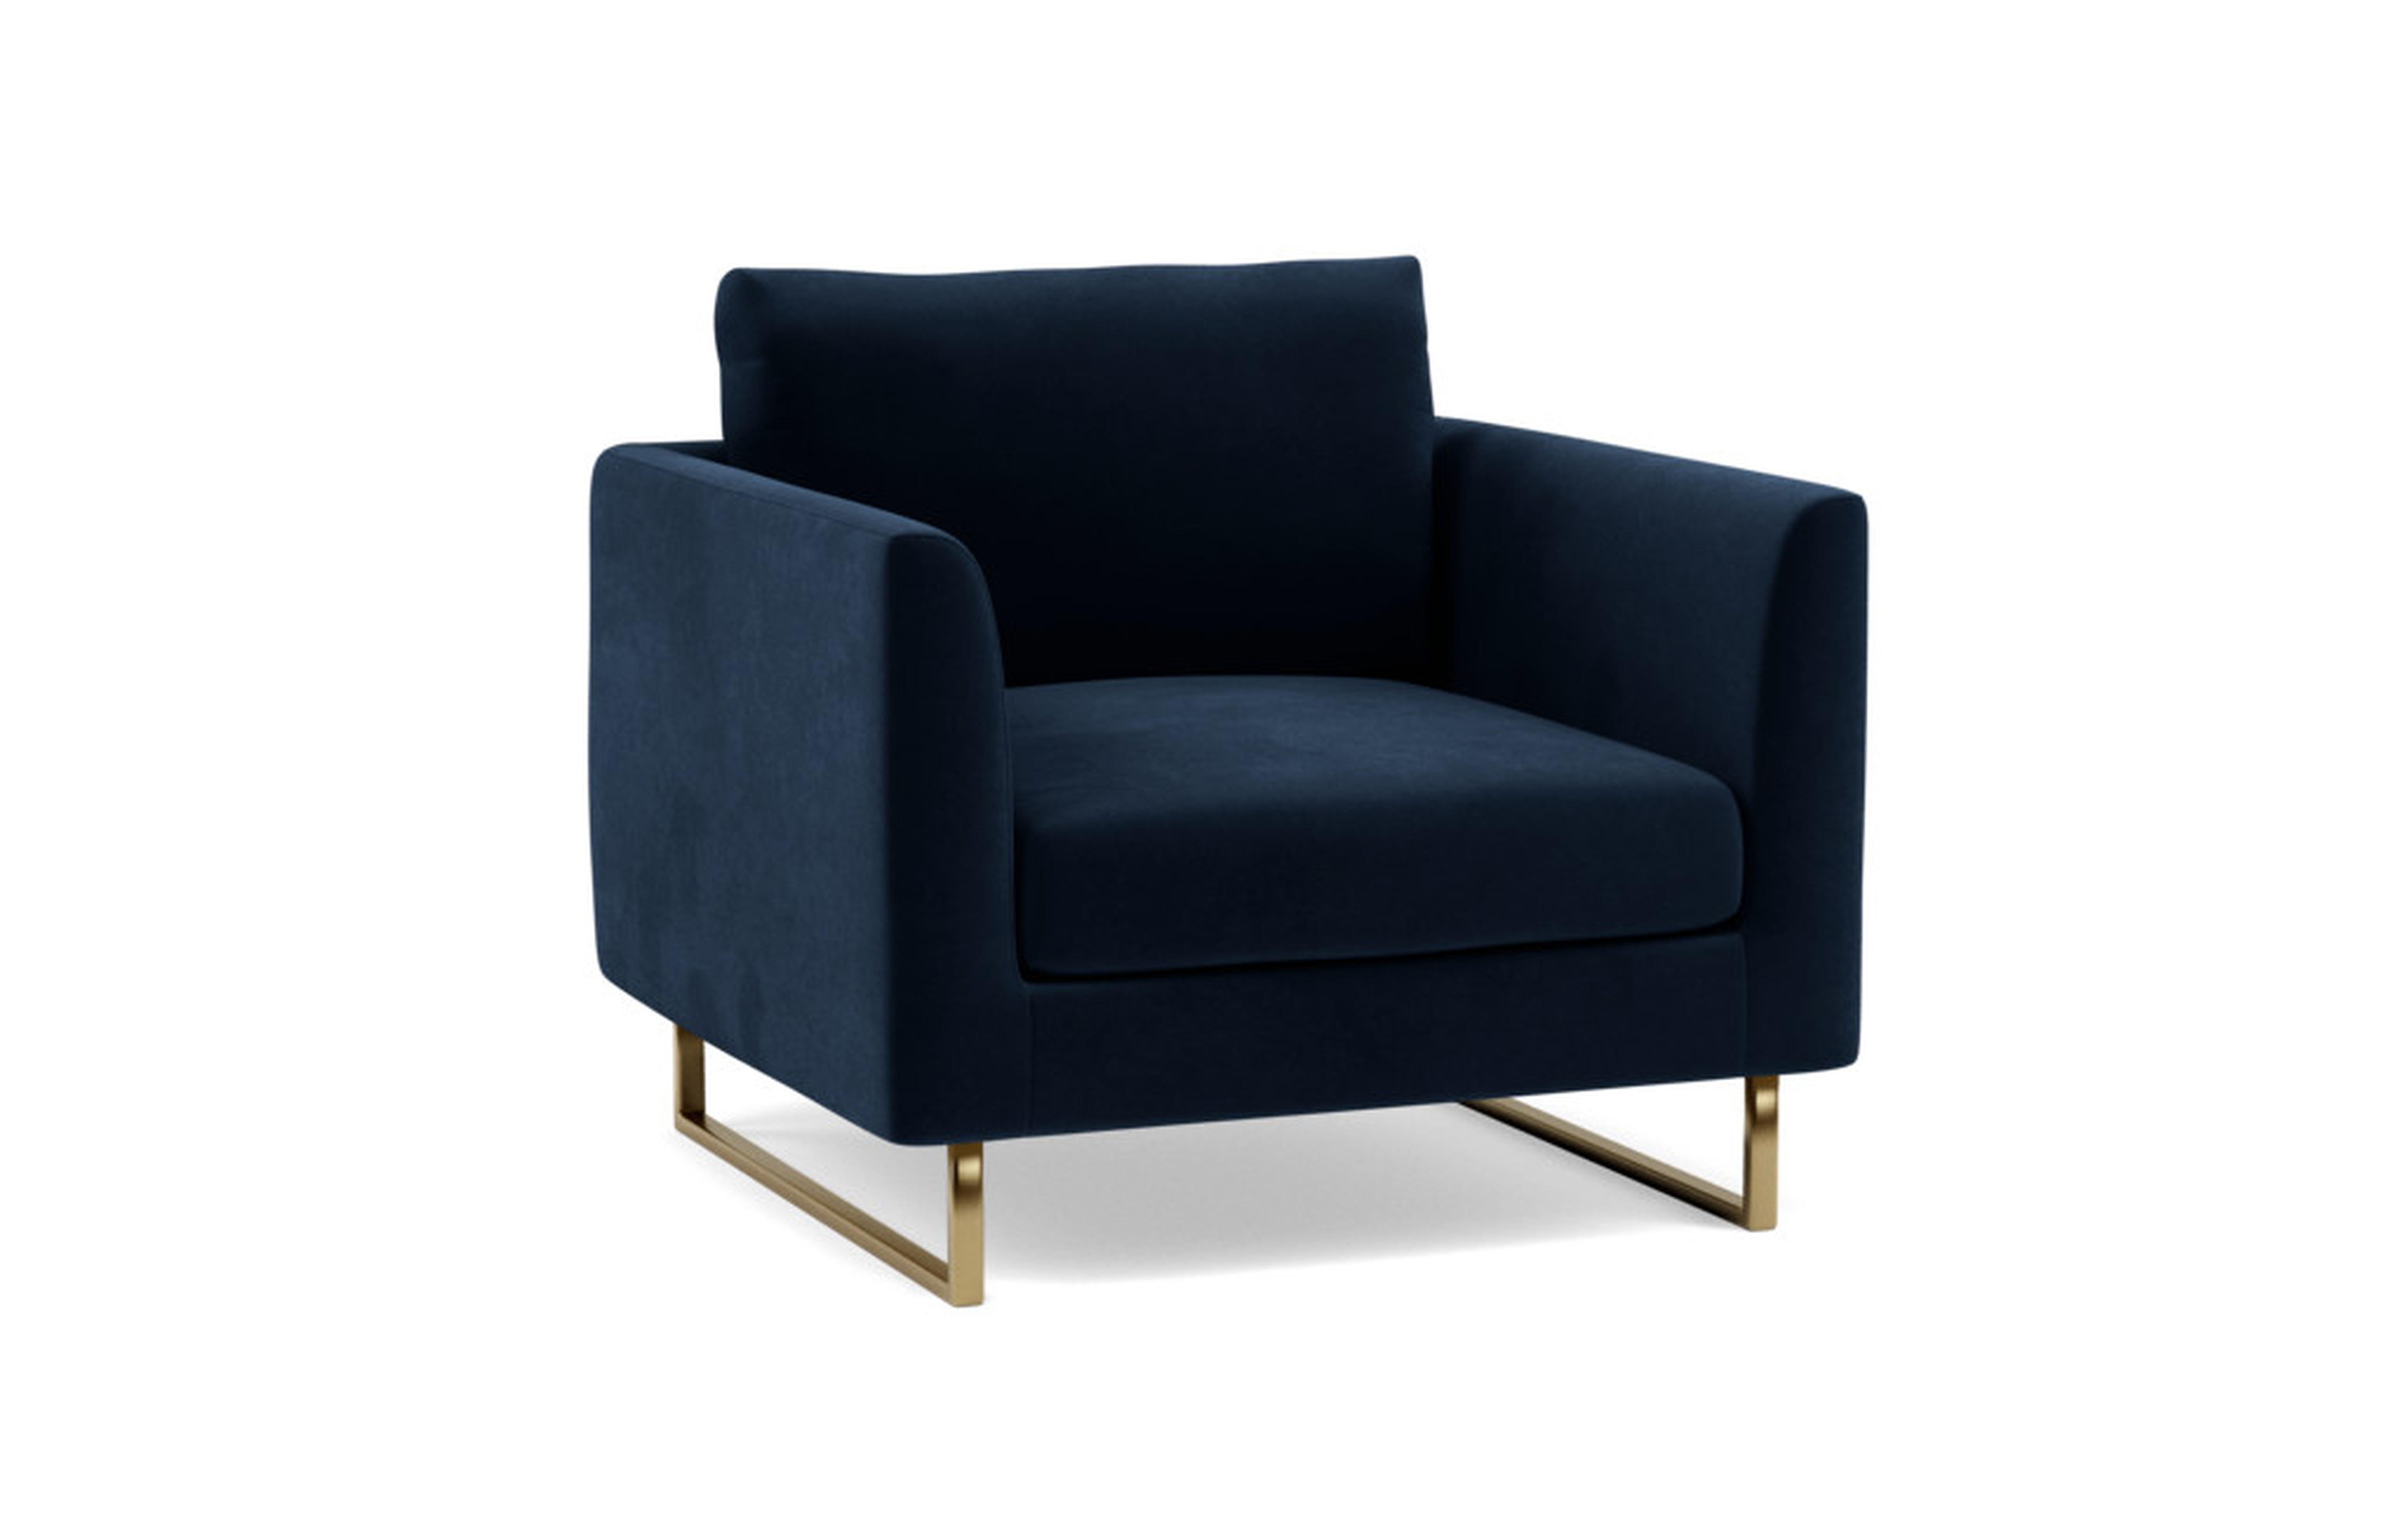 Owens Accent Chair with Blue Navy Fabric, down alternative cushions, and Matte Brass legs - Interior Define